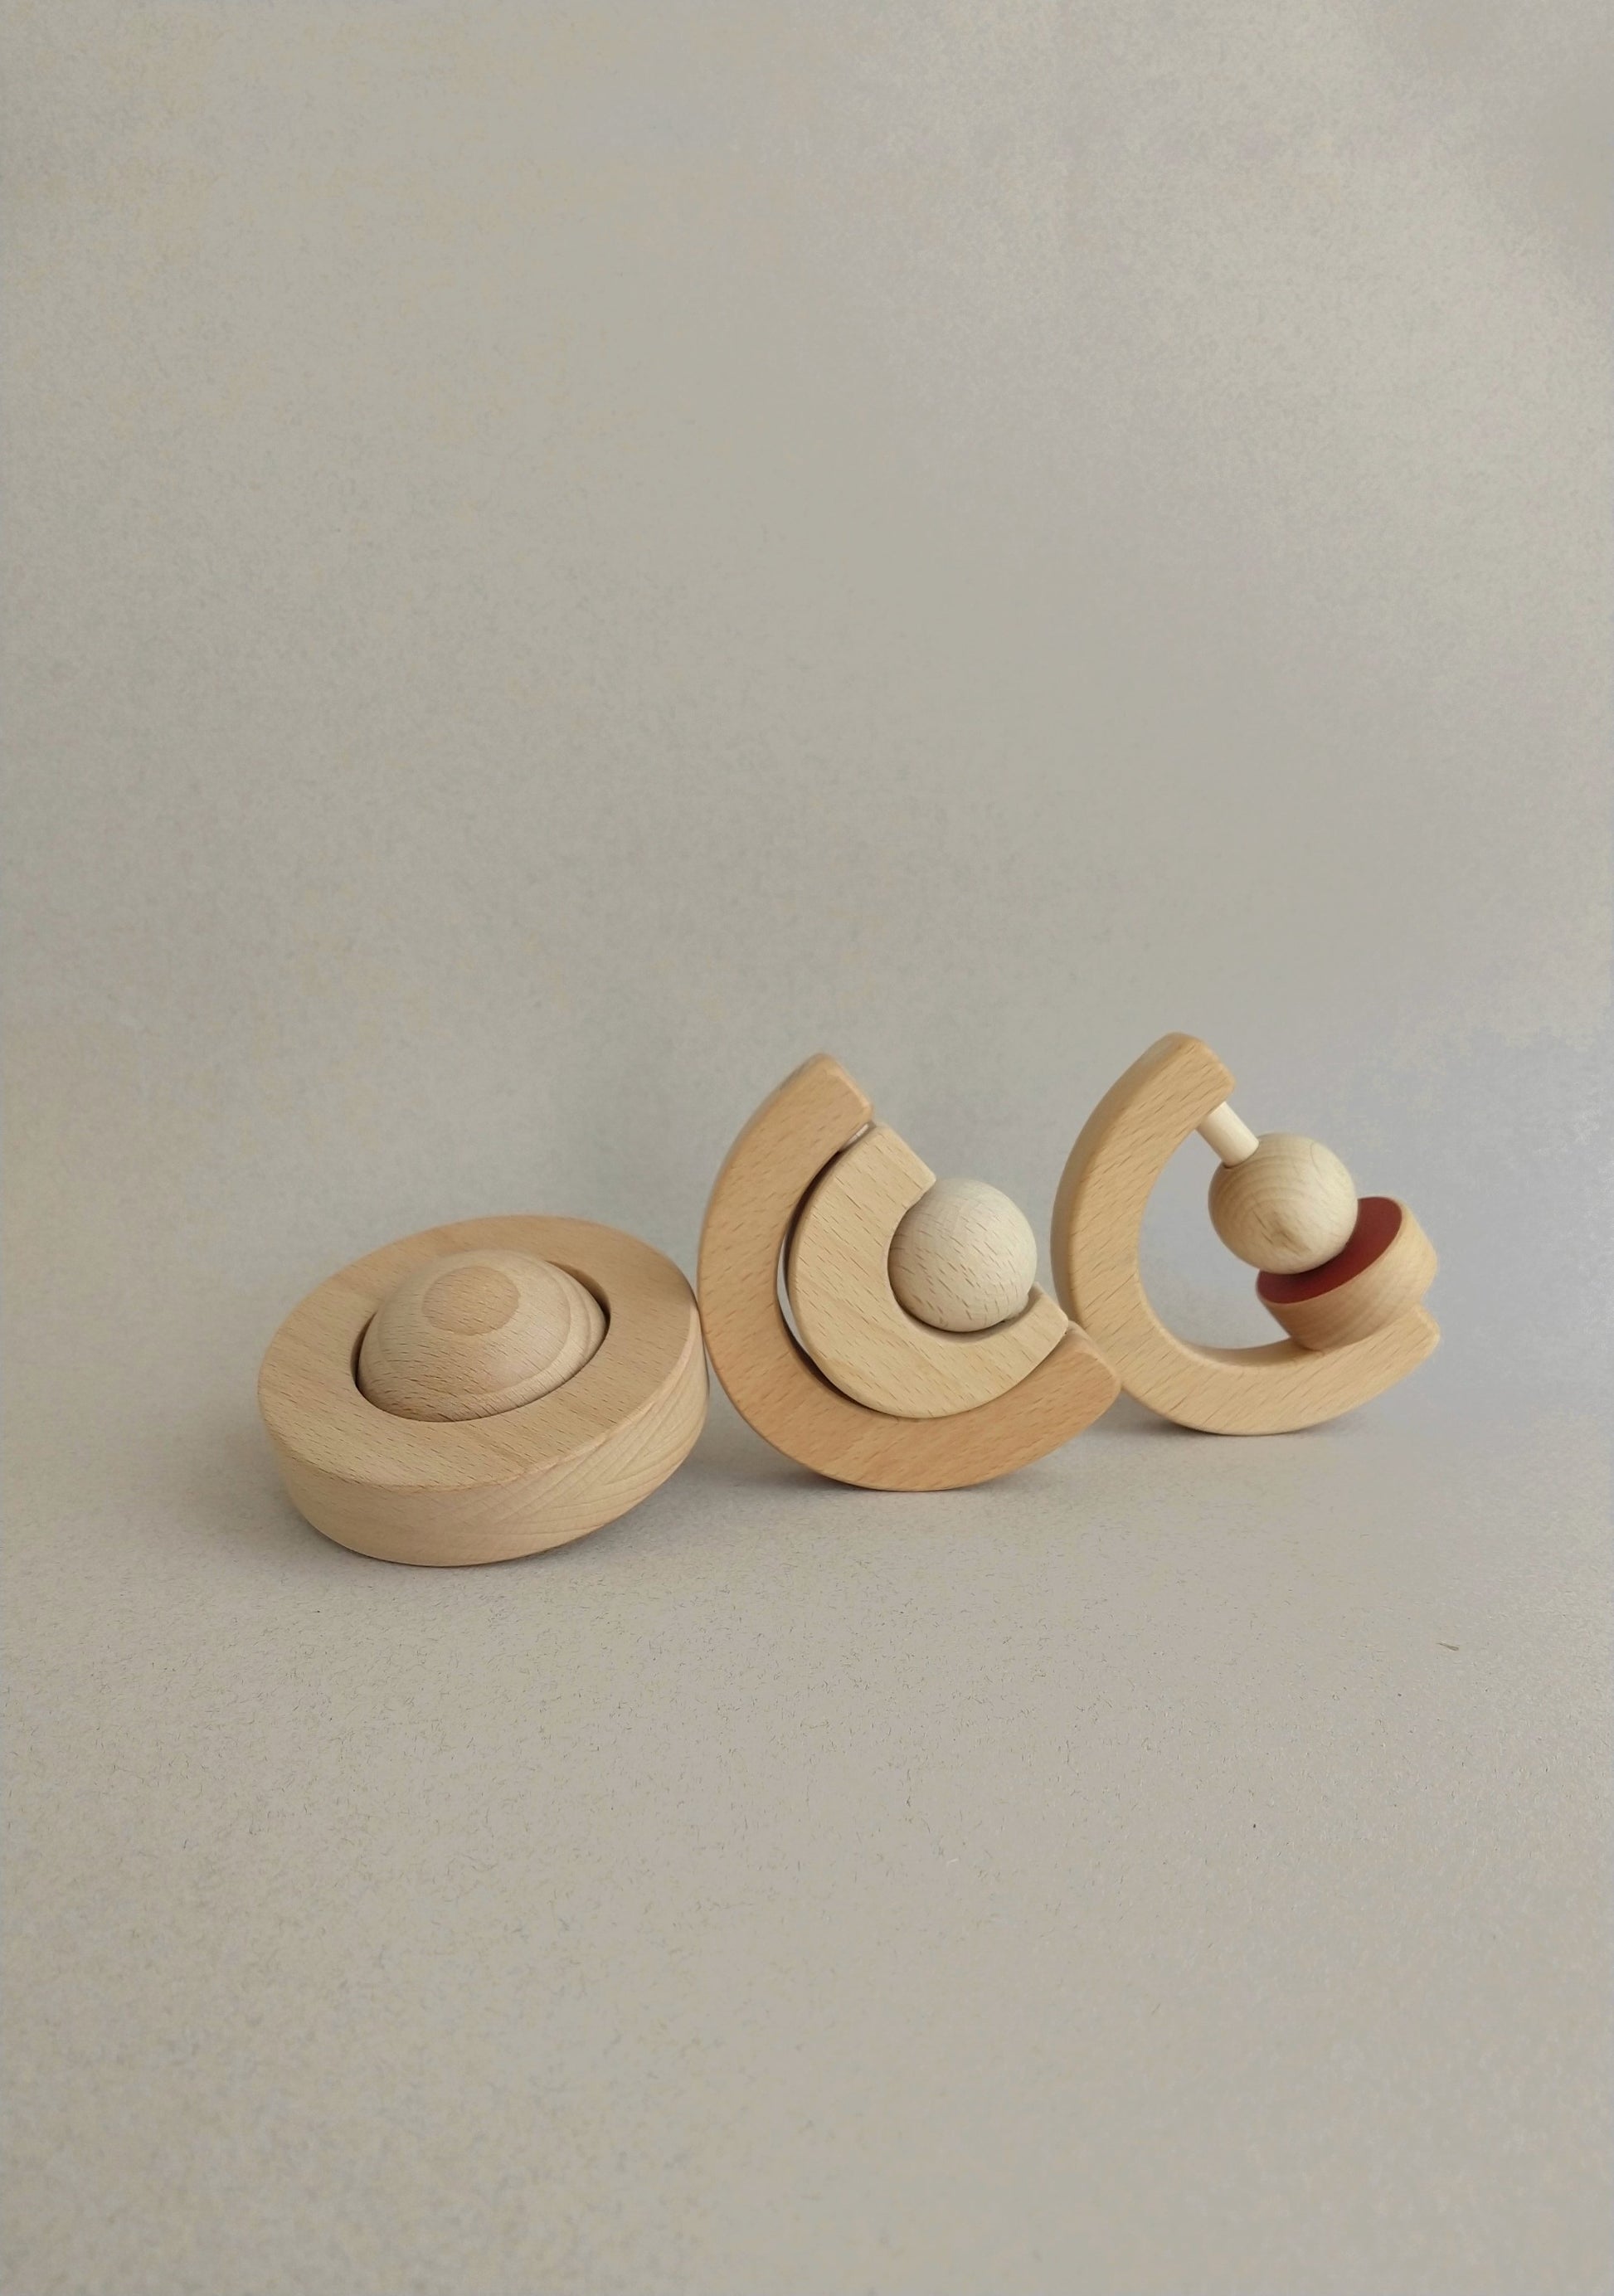 wooden baby teethers hand-cut, hand-painted and sanded satin smooth to offer soft surfaces for little hands.